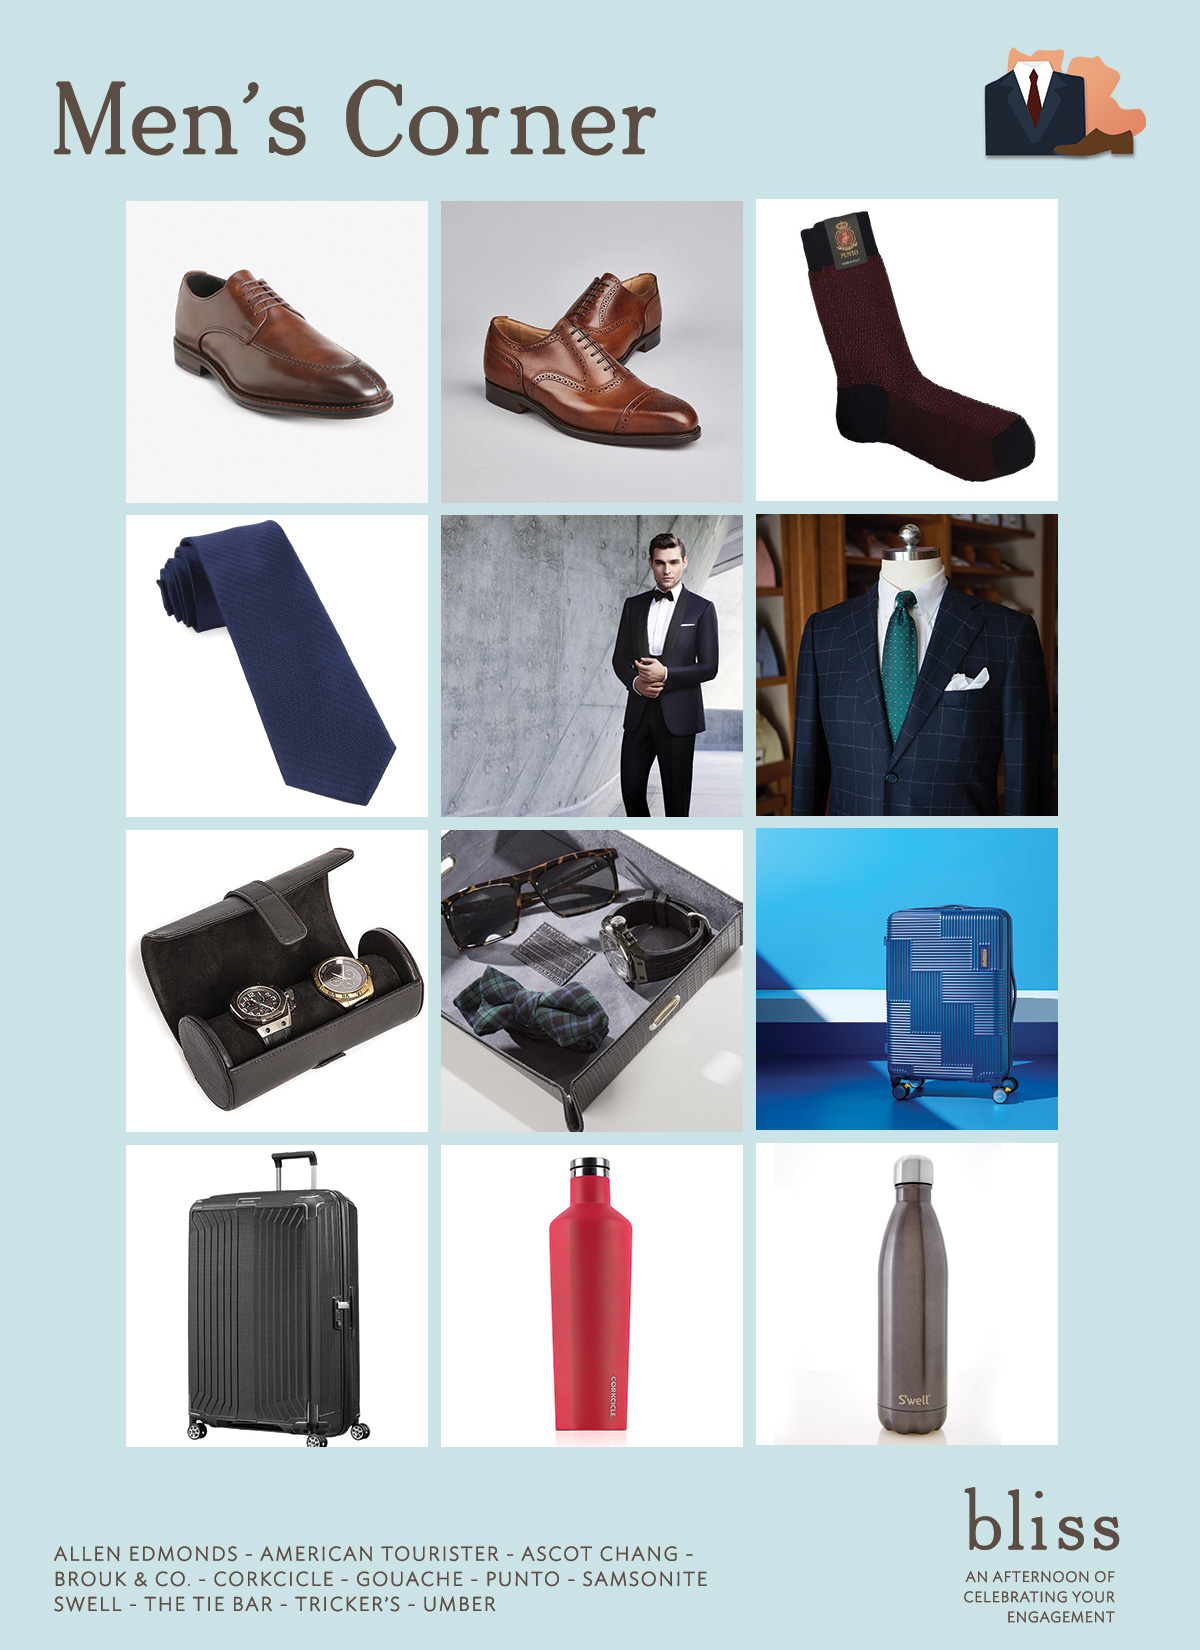 Allen Edmonds - American Tourister - Ascot Chang - Brouk & Co. - Corkcicle - Gouche - Punto - Samsonite - Swell - The Tie Bar - Tricker’s - Umber